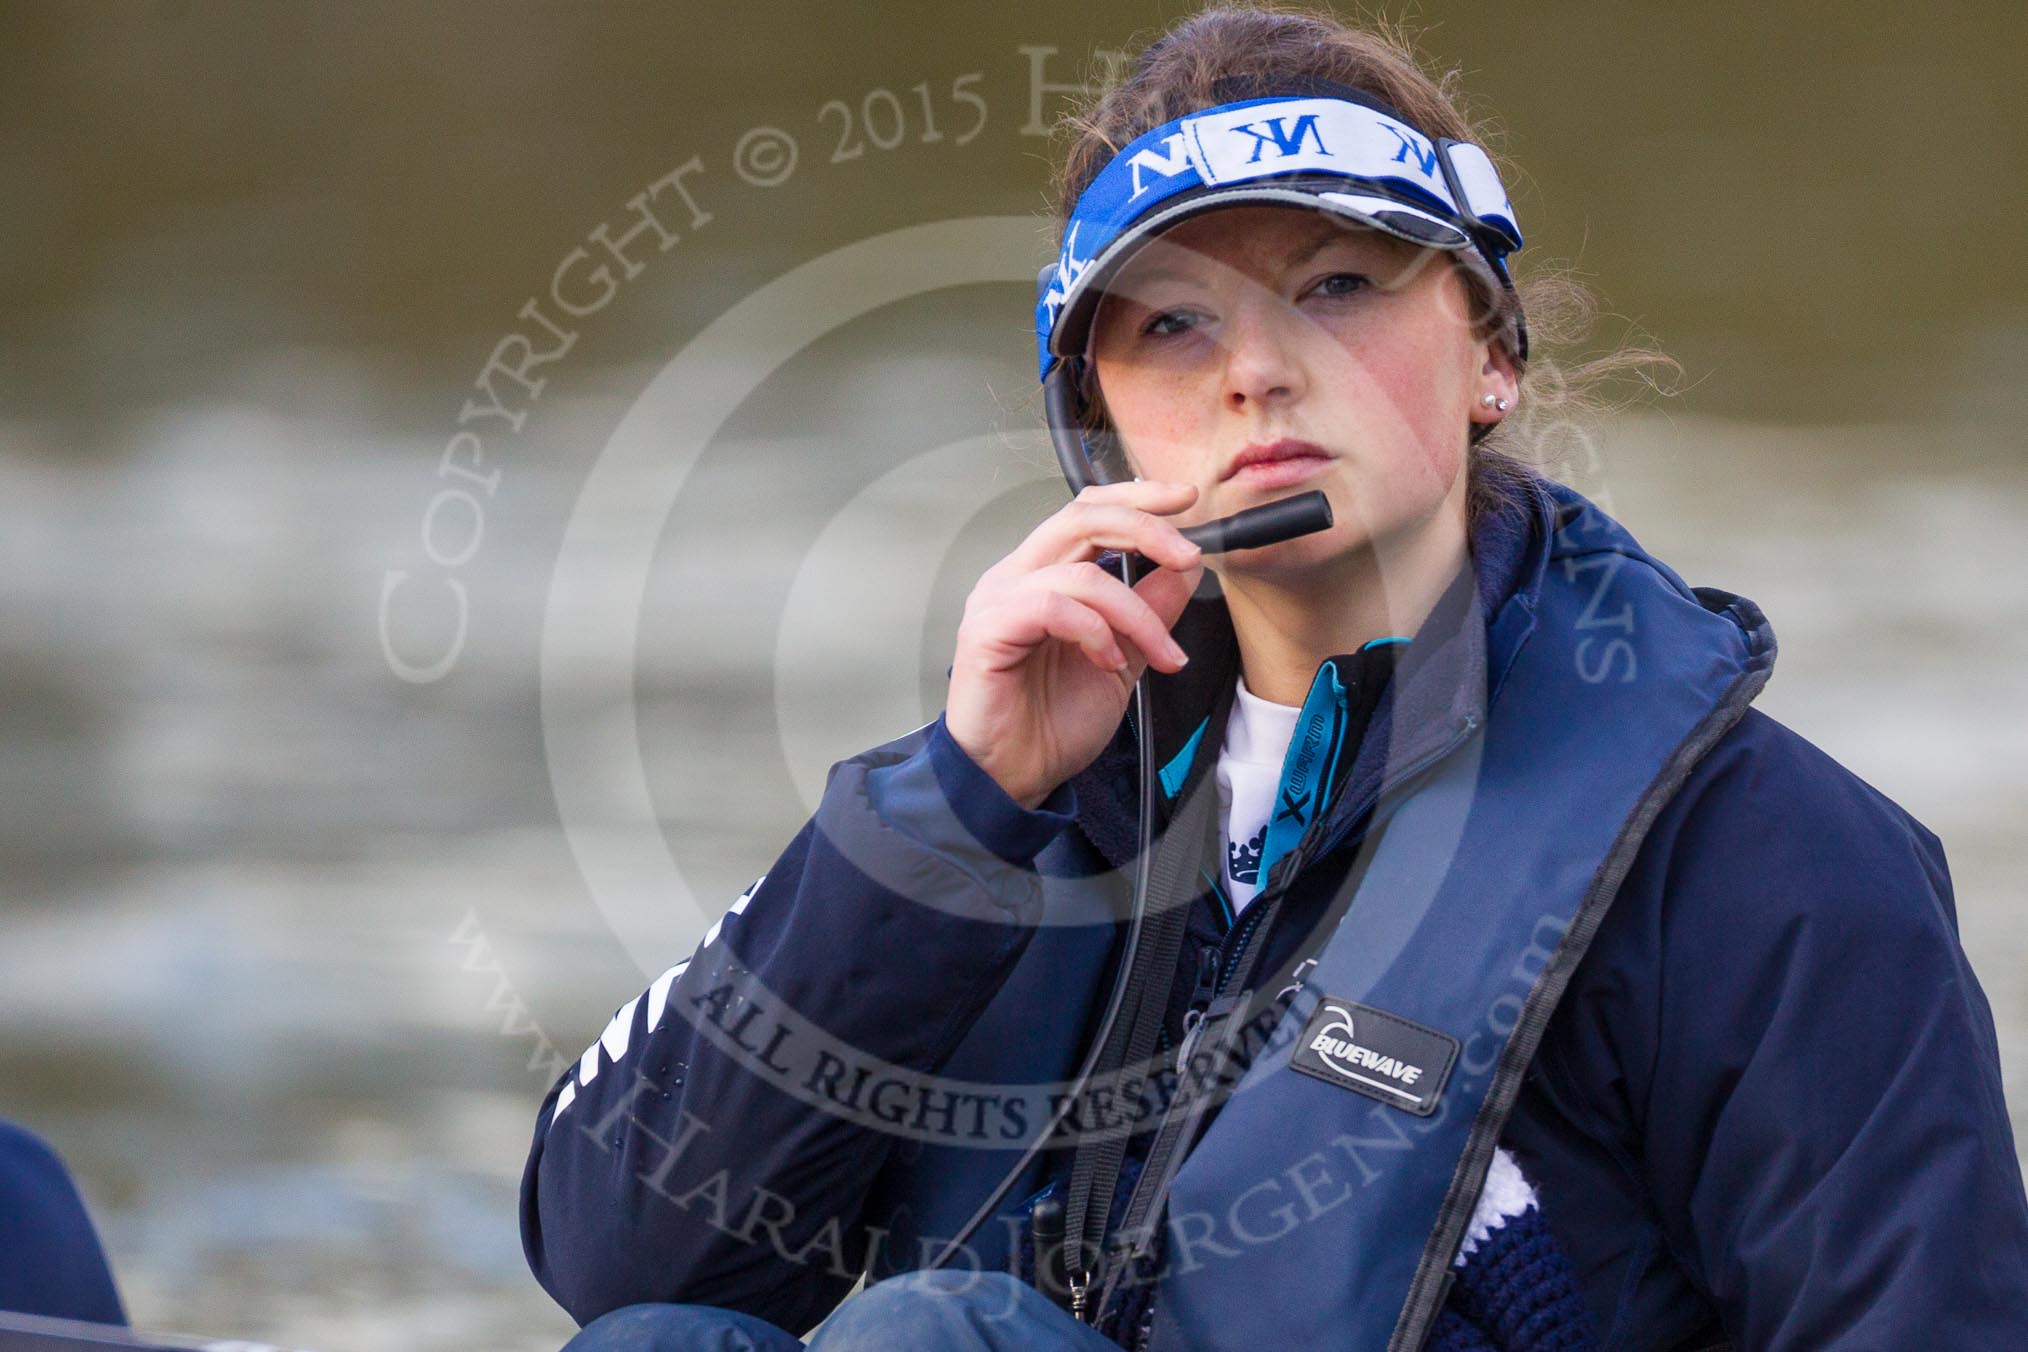 The Boat Race season 2015: OUWBC training Wallingford.

Wallingford,

United Kingdom,
on 04 March 2015 at 16:42, image #224